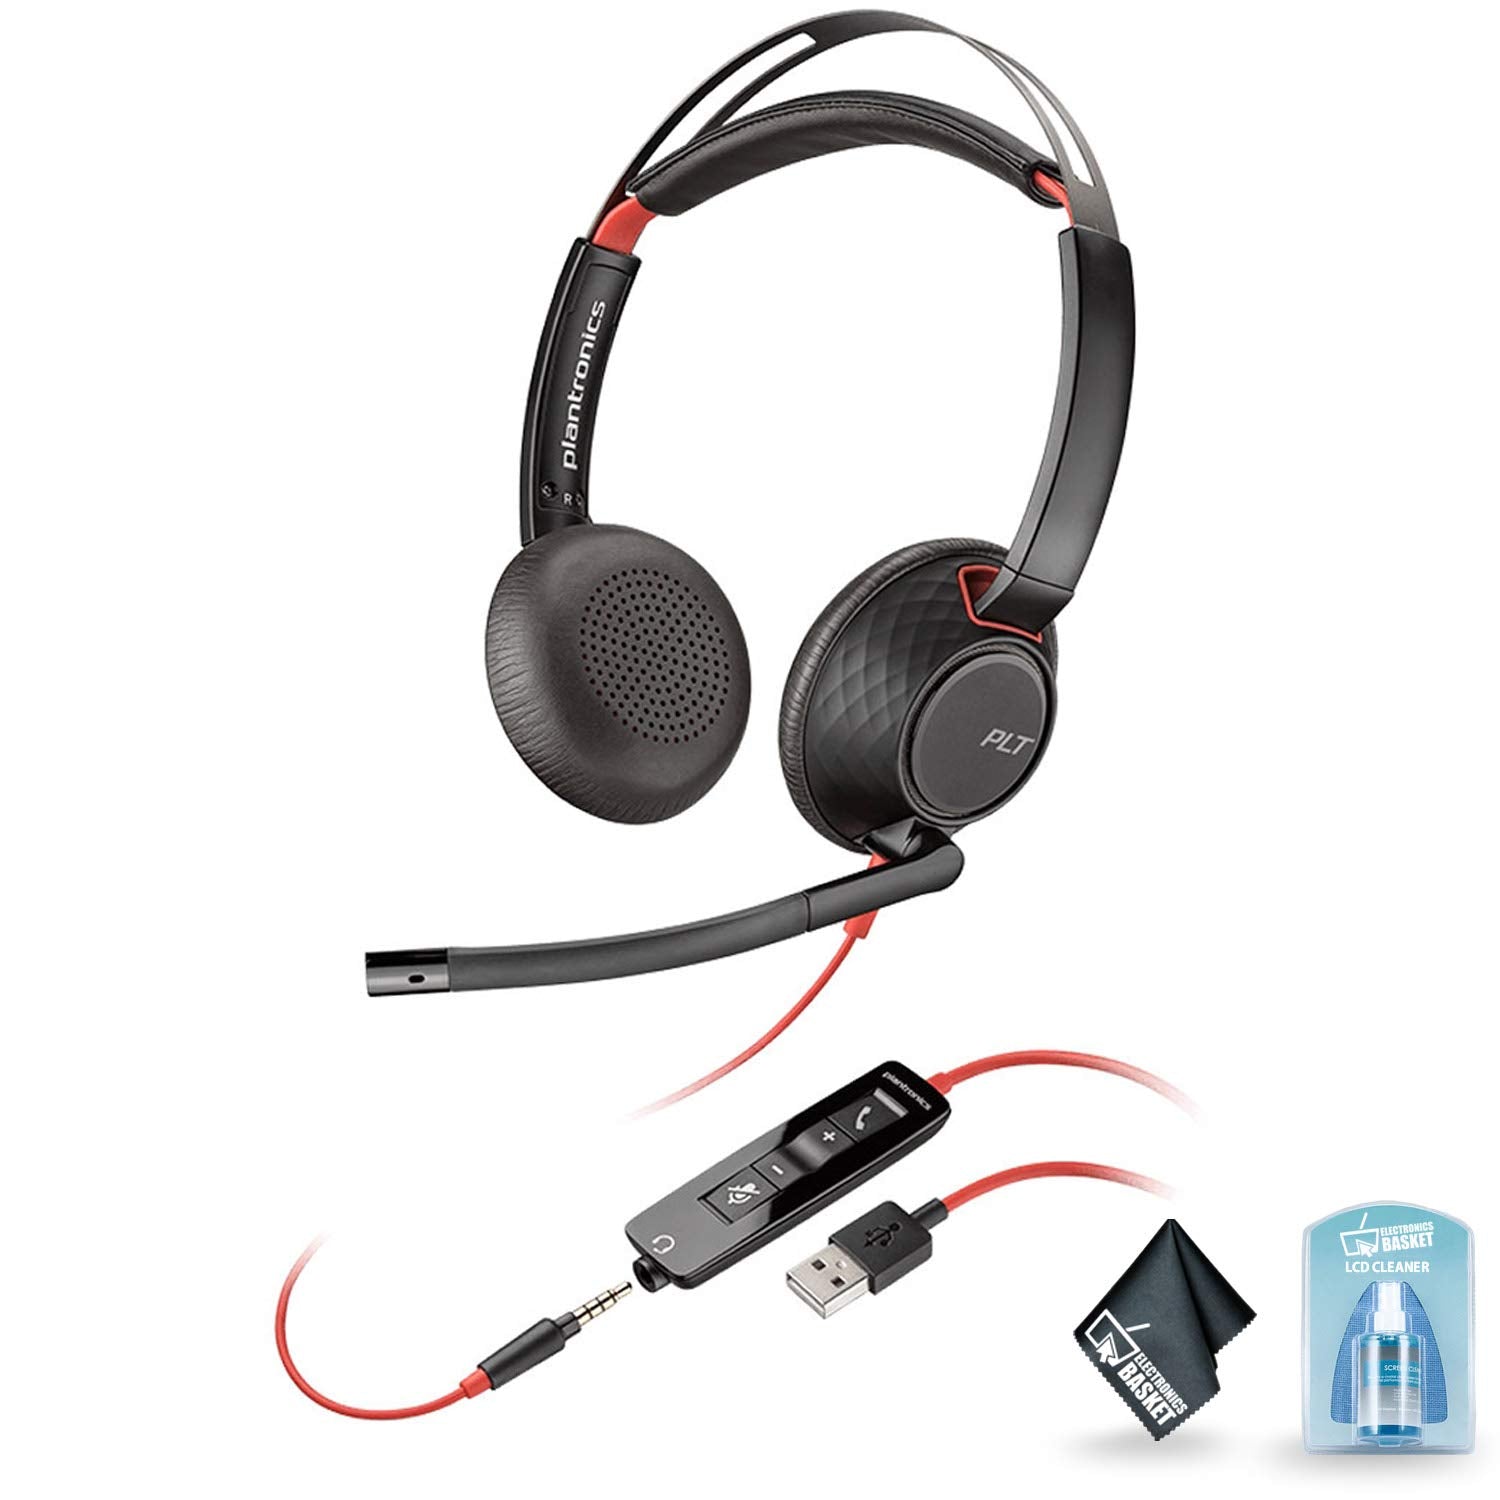 Plantronics Blackwire 5220, C5220, USB-A, Stereo - Headset with Accessories